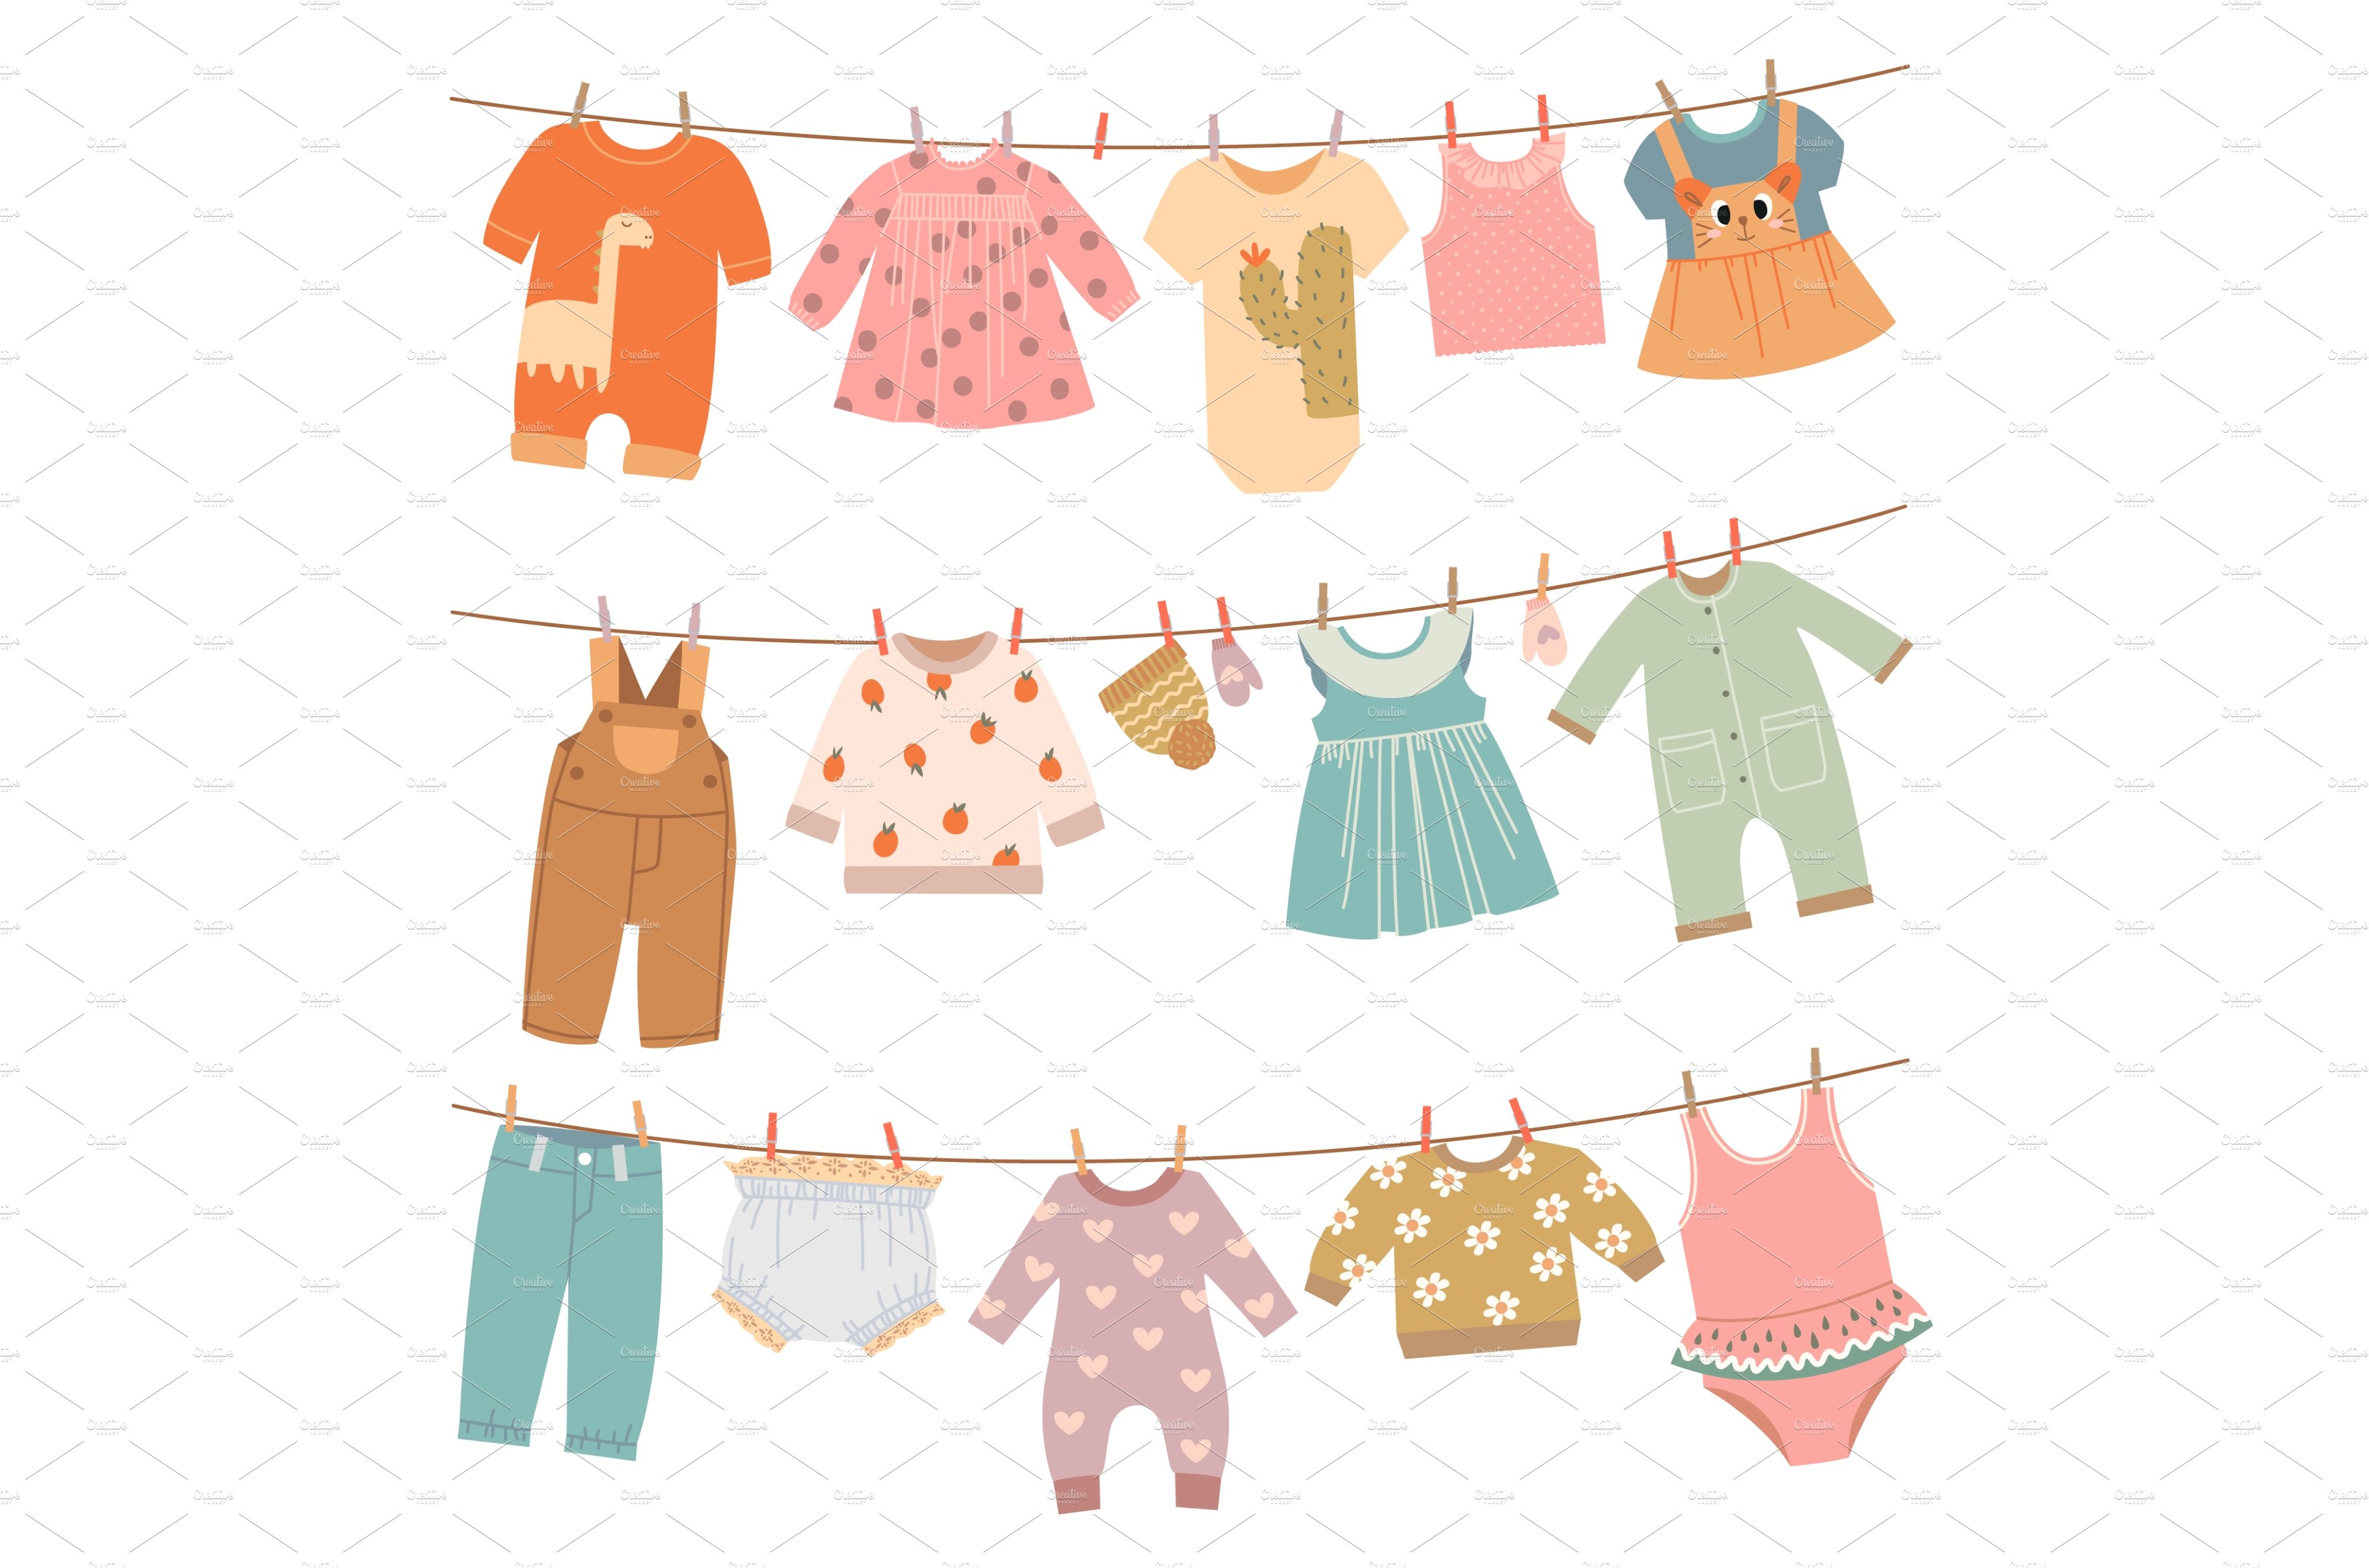 Clothes on ropes. Baby dress, infant cover image.